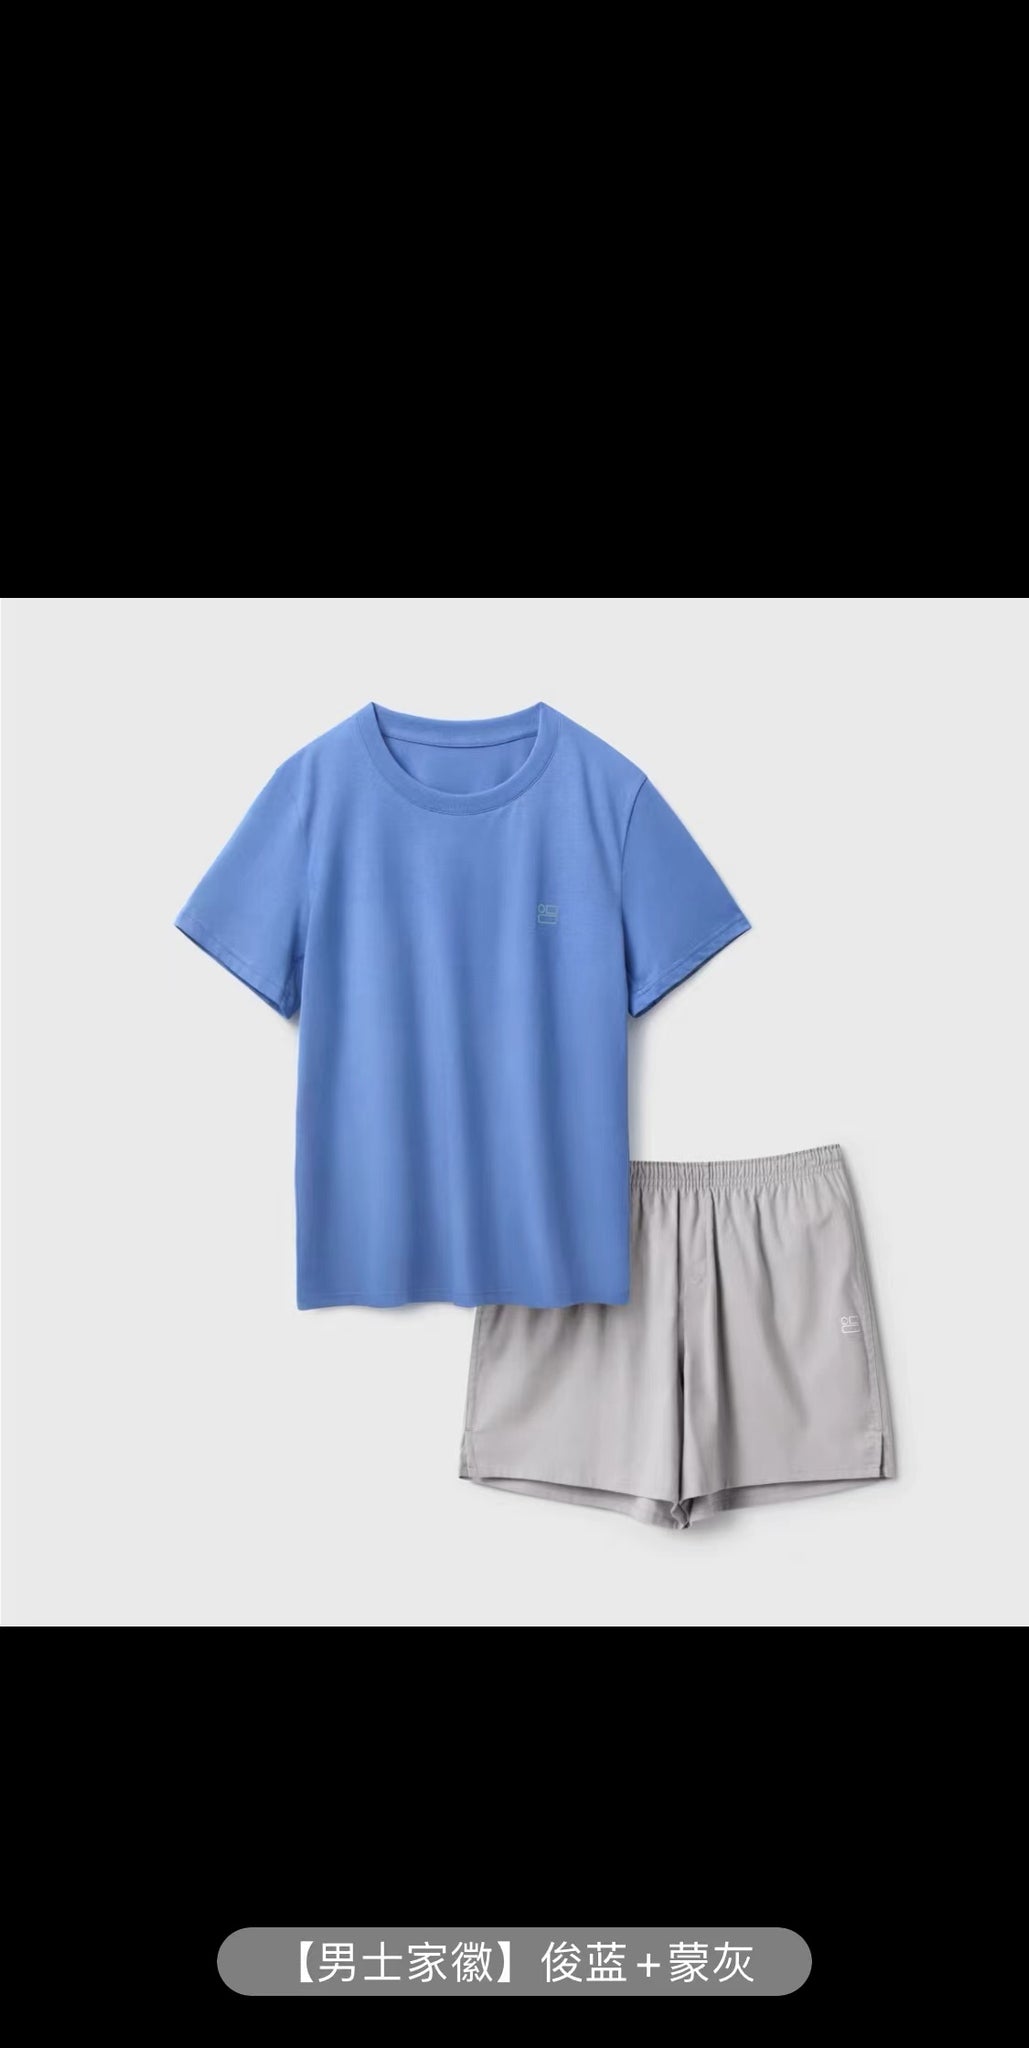 Bananain Pure Cotton Soft Home Wear Set for Men  蕉内家居服套装 男士